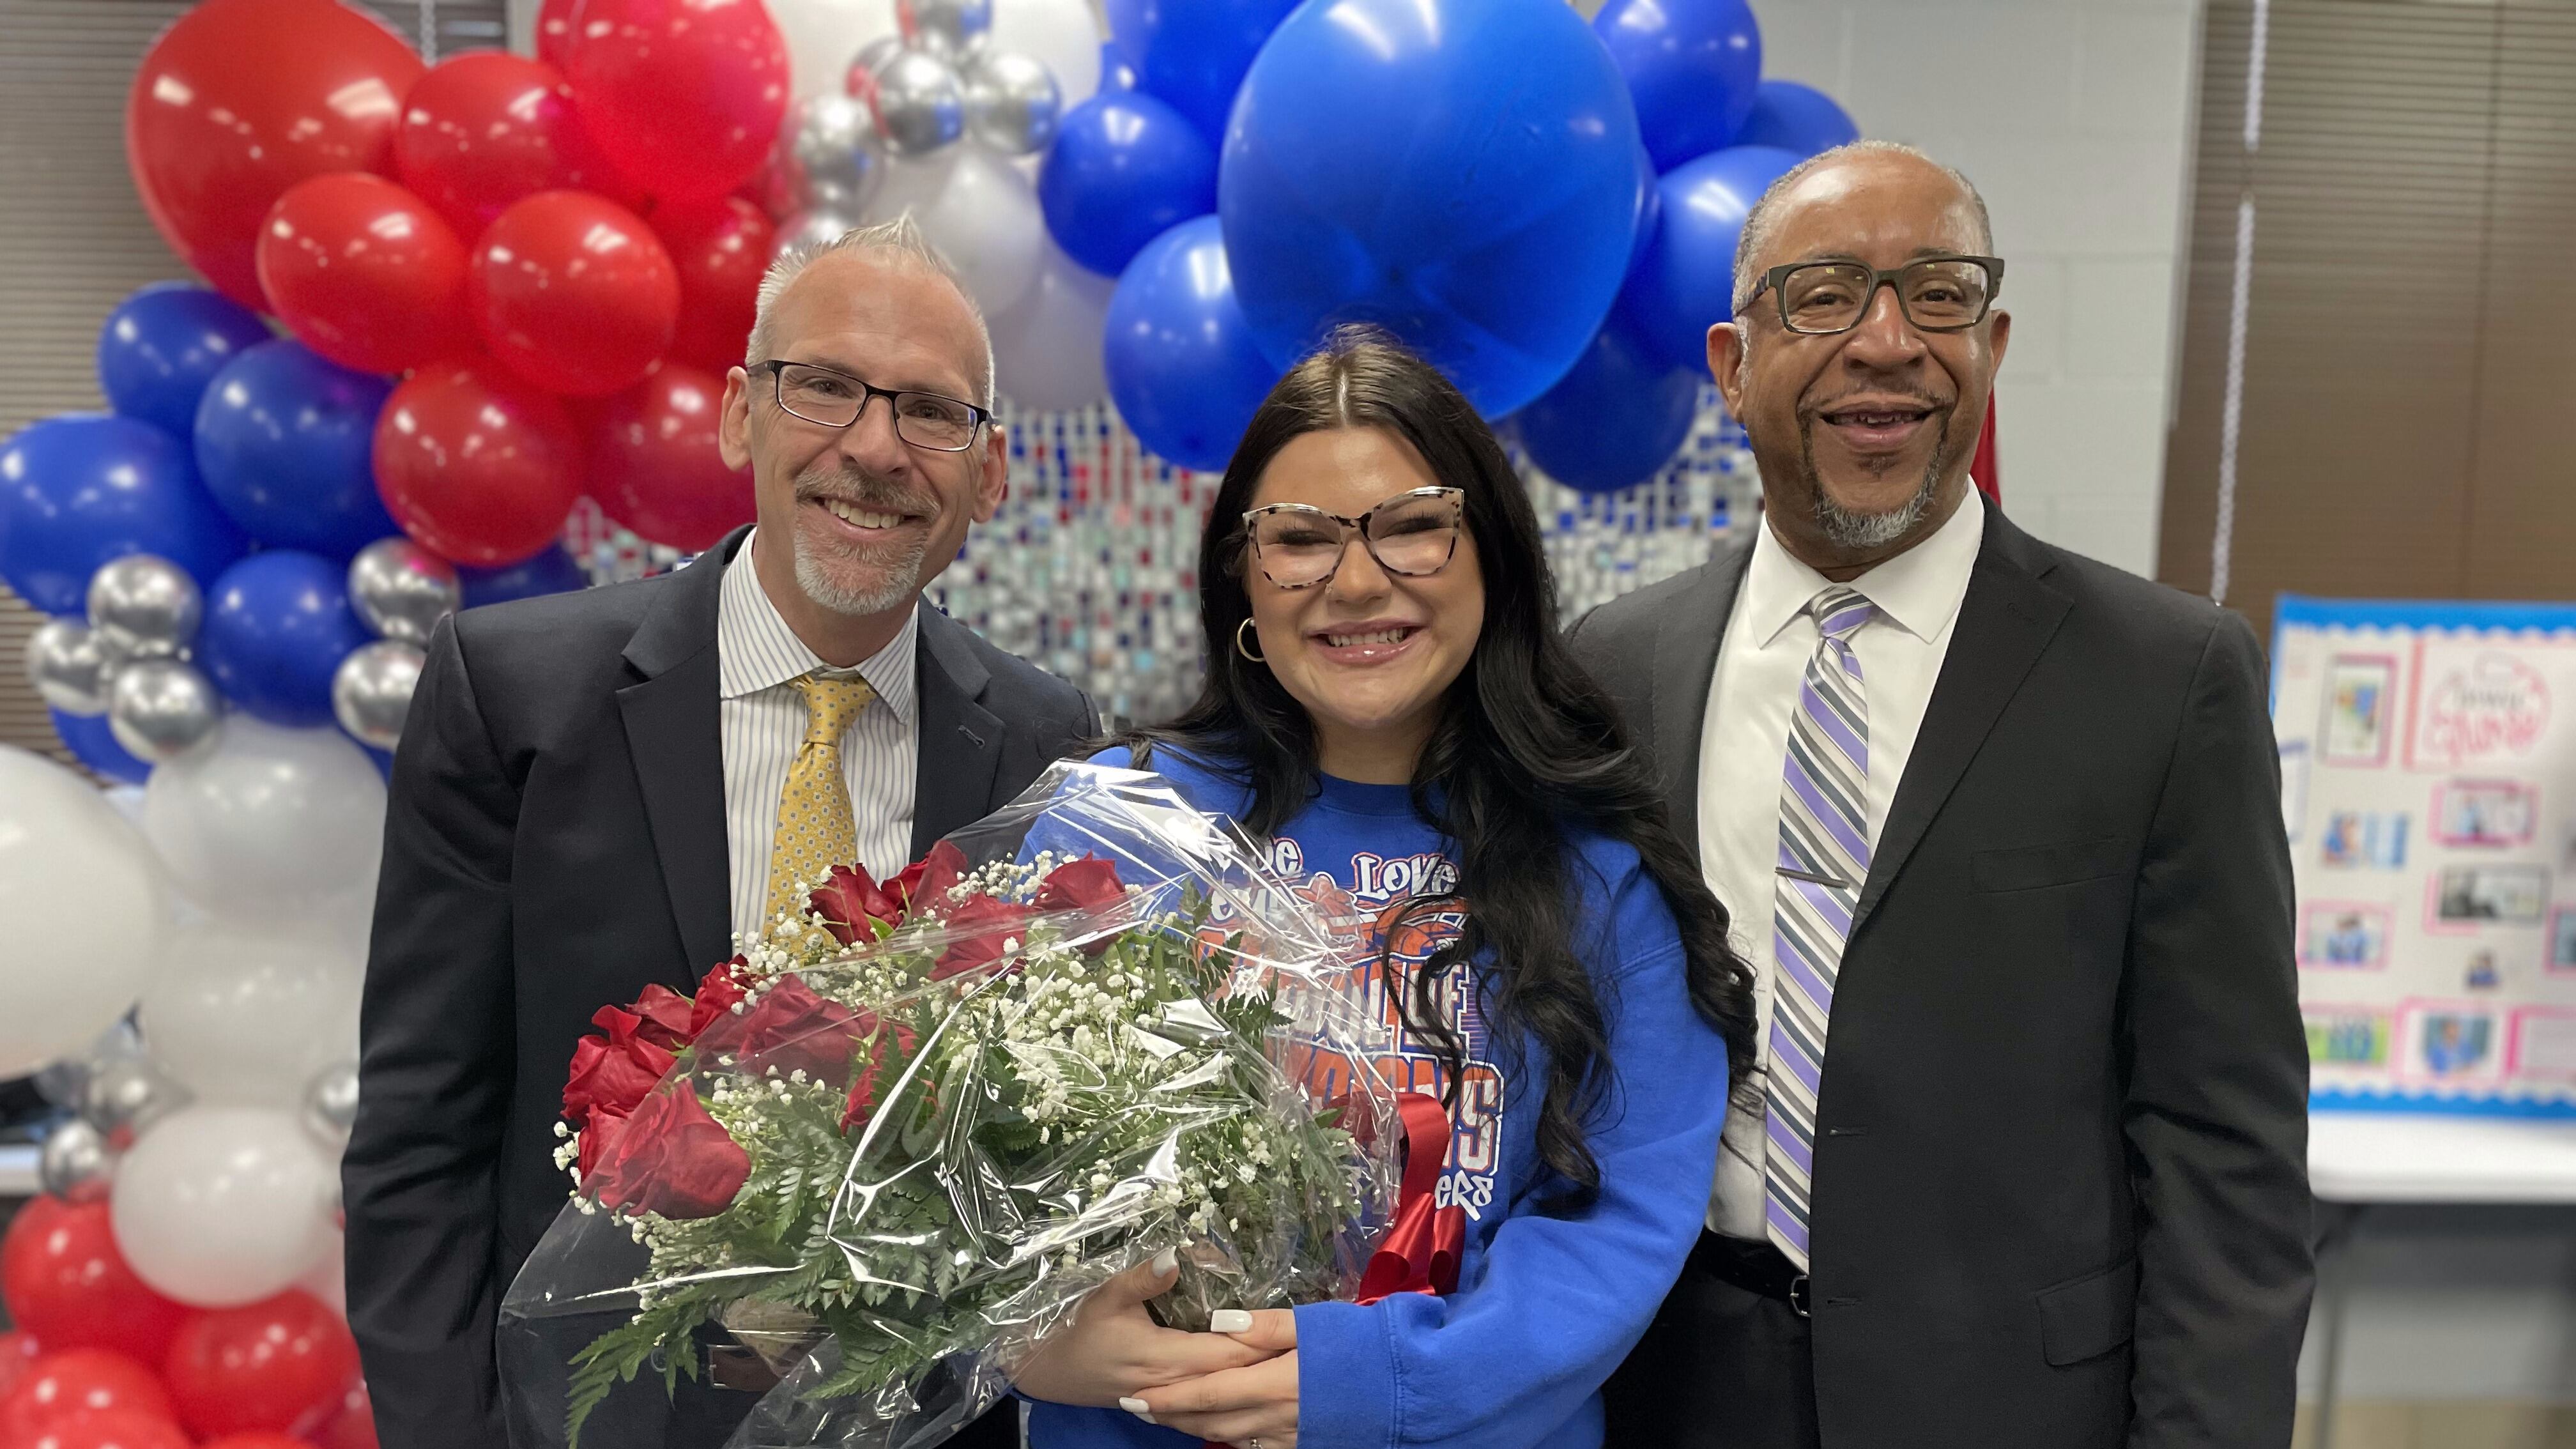 Red, blue, white, and silver balloons are behind State Superintendent Tony Sanders, Briana Morales with a bouquet of flowers in her hands, and Gordon Bush Alternative Center’s principal Darnell Spencer (from left to right) smiling at the camera at a photo.